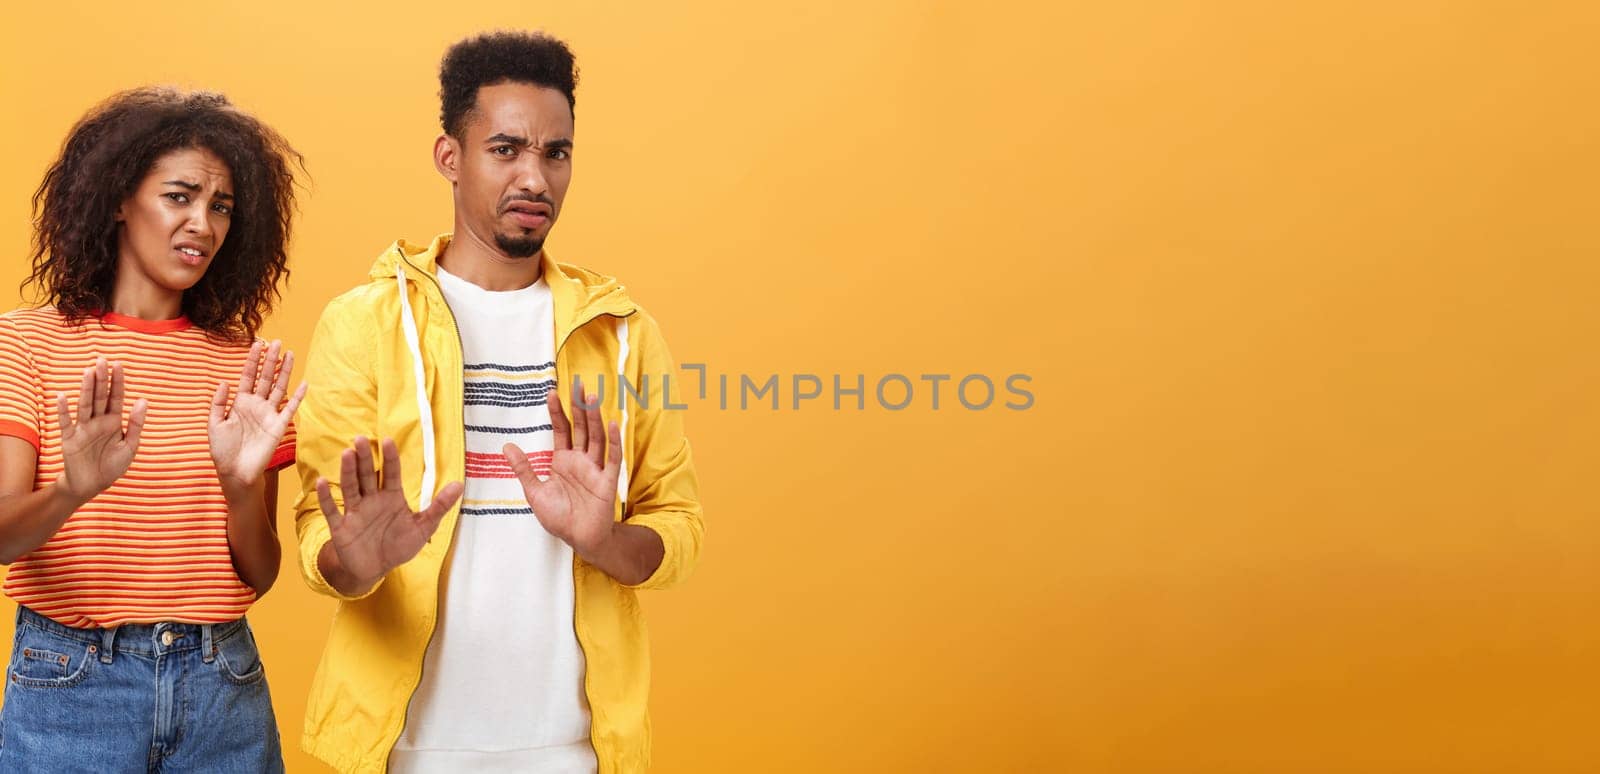 Two african american stylish friends hanging around interrupted by weird guy offering strange proposal shaking hands near chest in refusal and rejection gesture grimacing from aversion and dislike. People and emotions concept